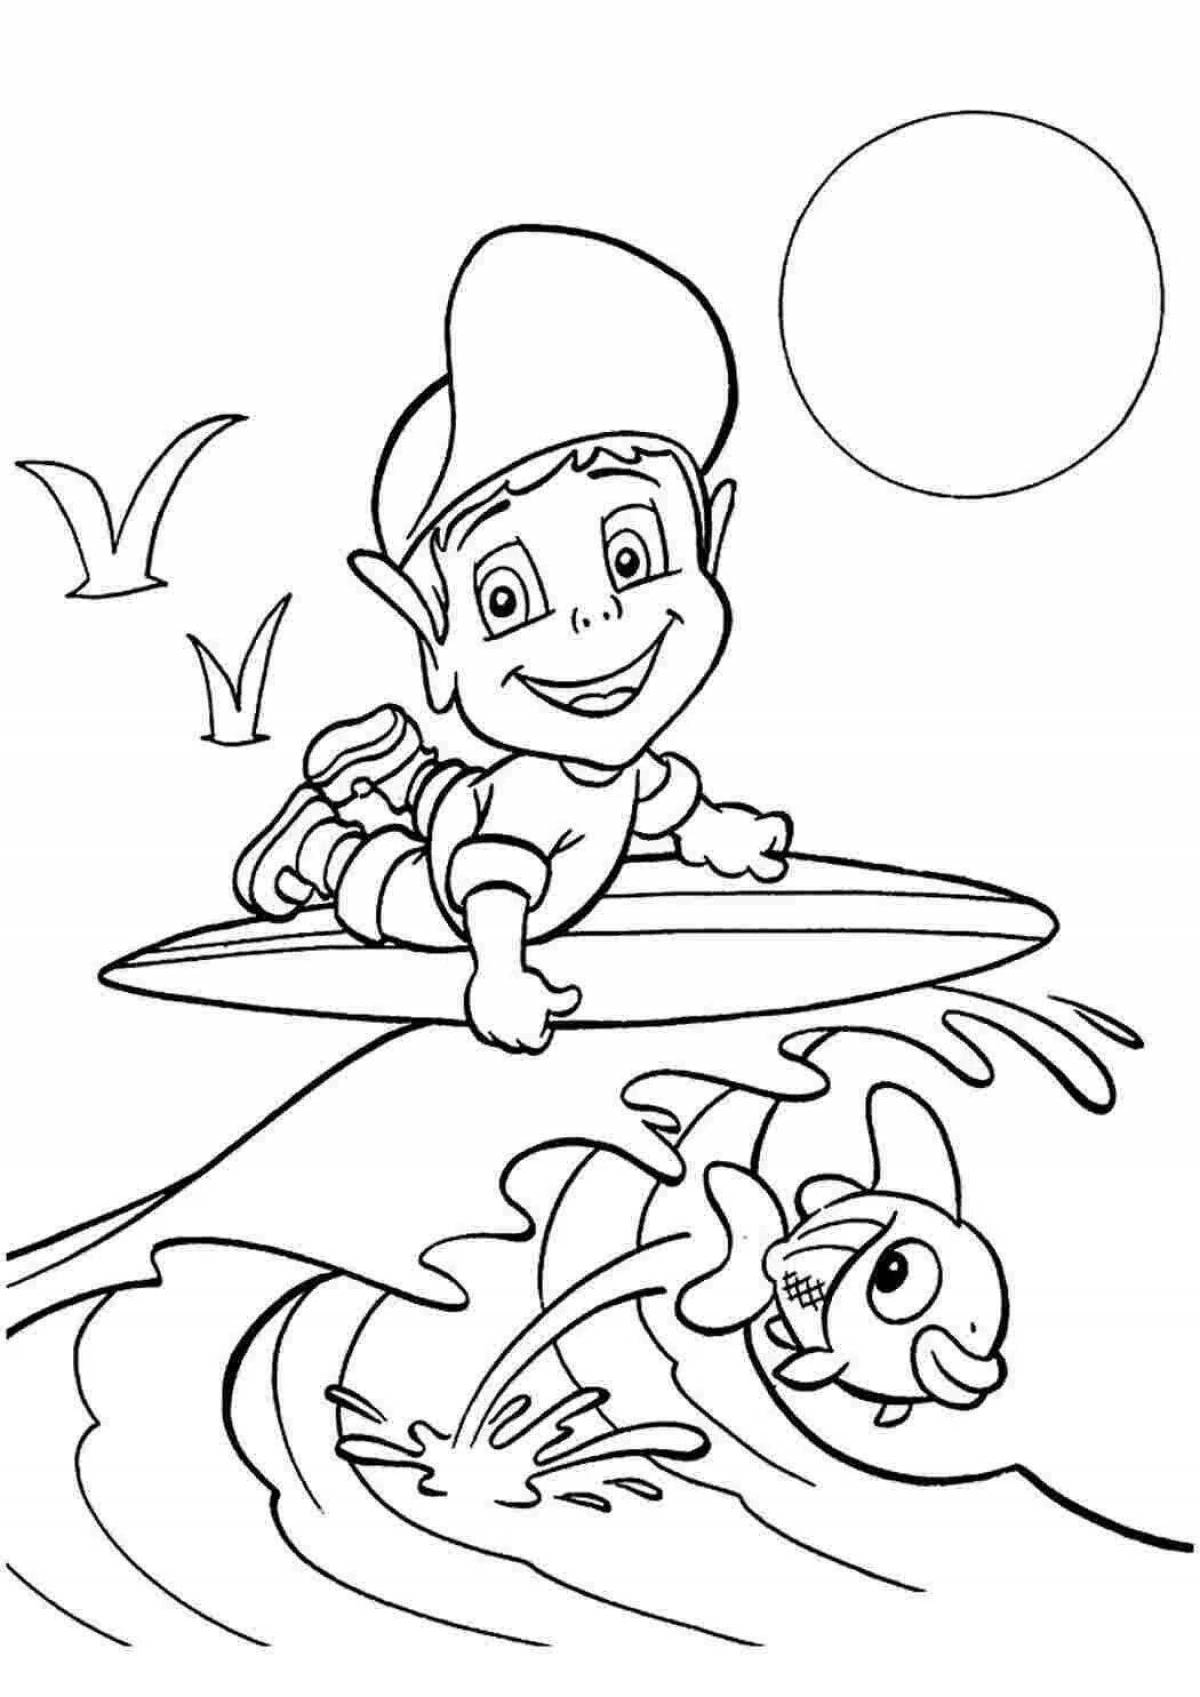 Fantastic surfing coloring page